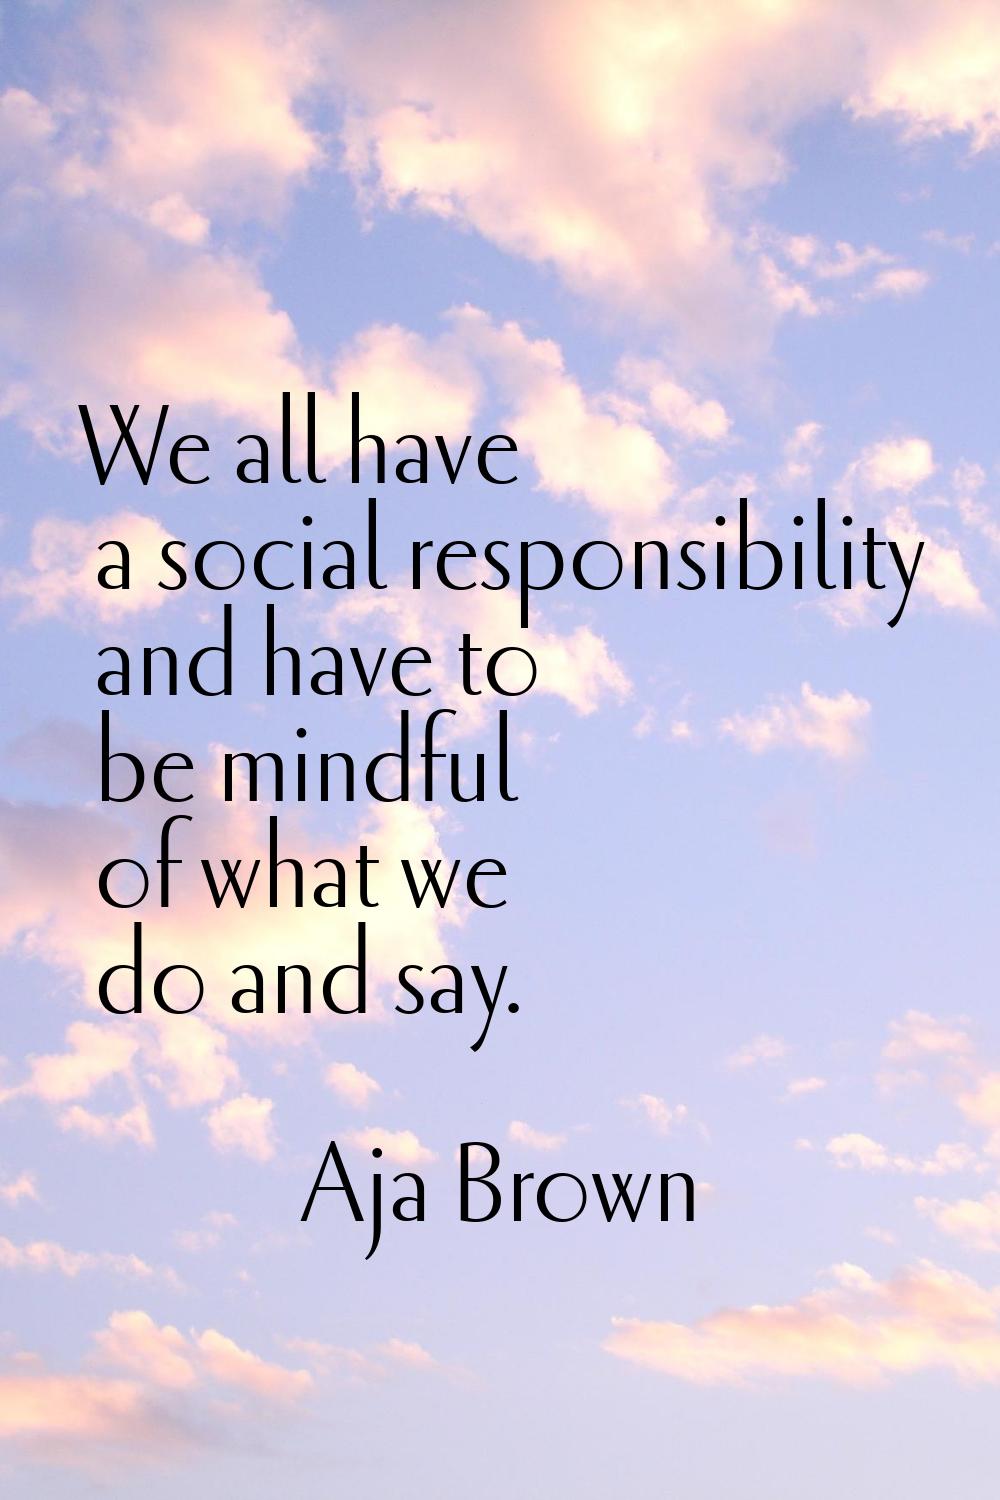 We all have a social responsibility and have to be mindful of what we do and say.